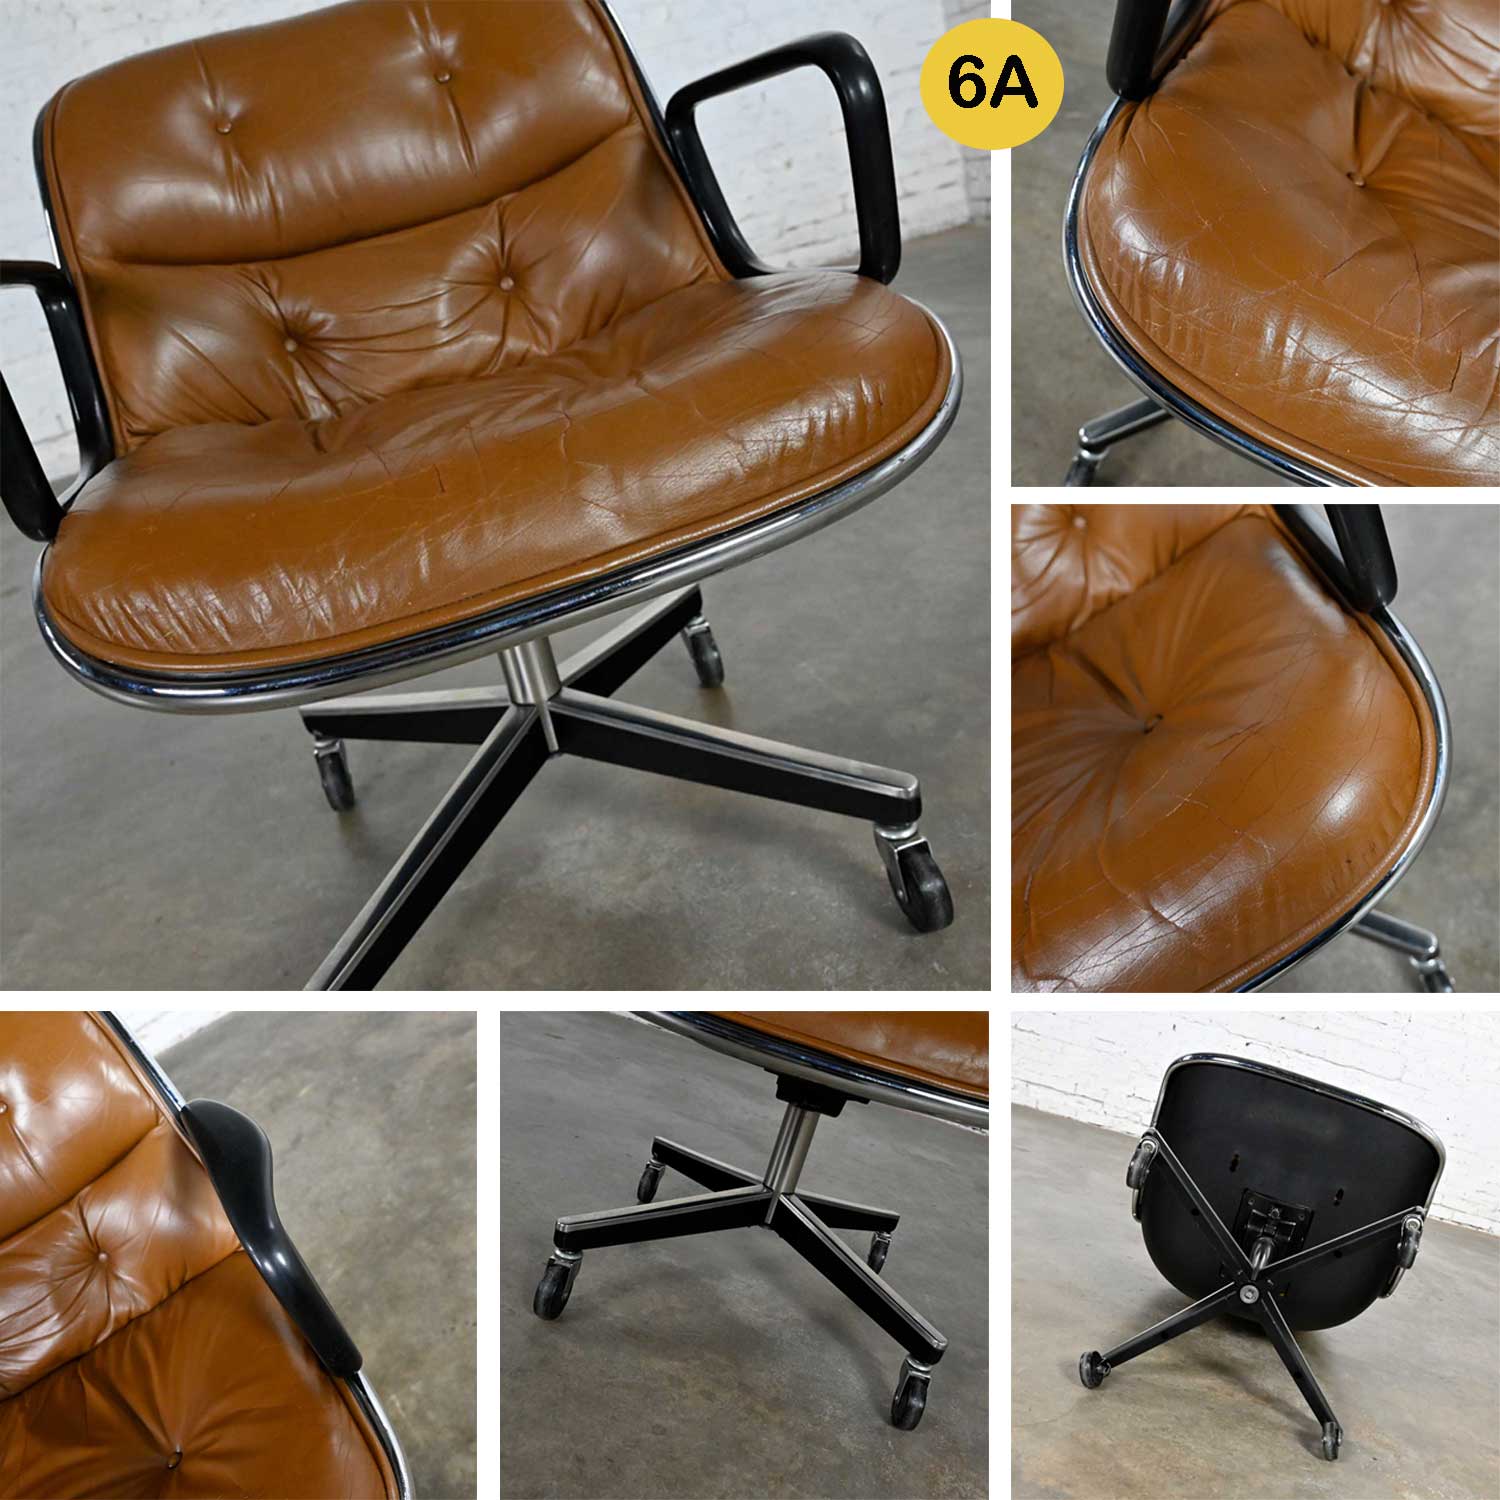 Executive Armchairs by Charles Pollock for Knoll Brown Leather with 4 Prong Base 3 Selling Separately